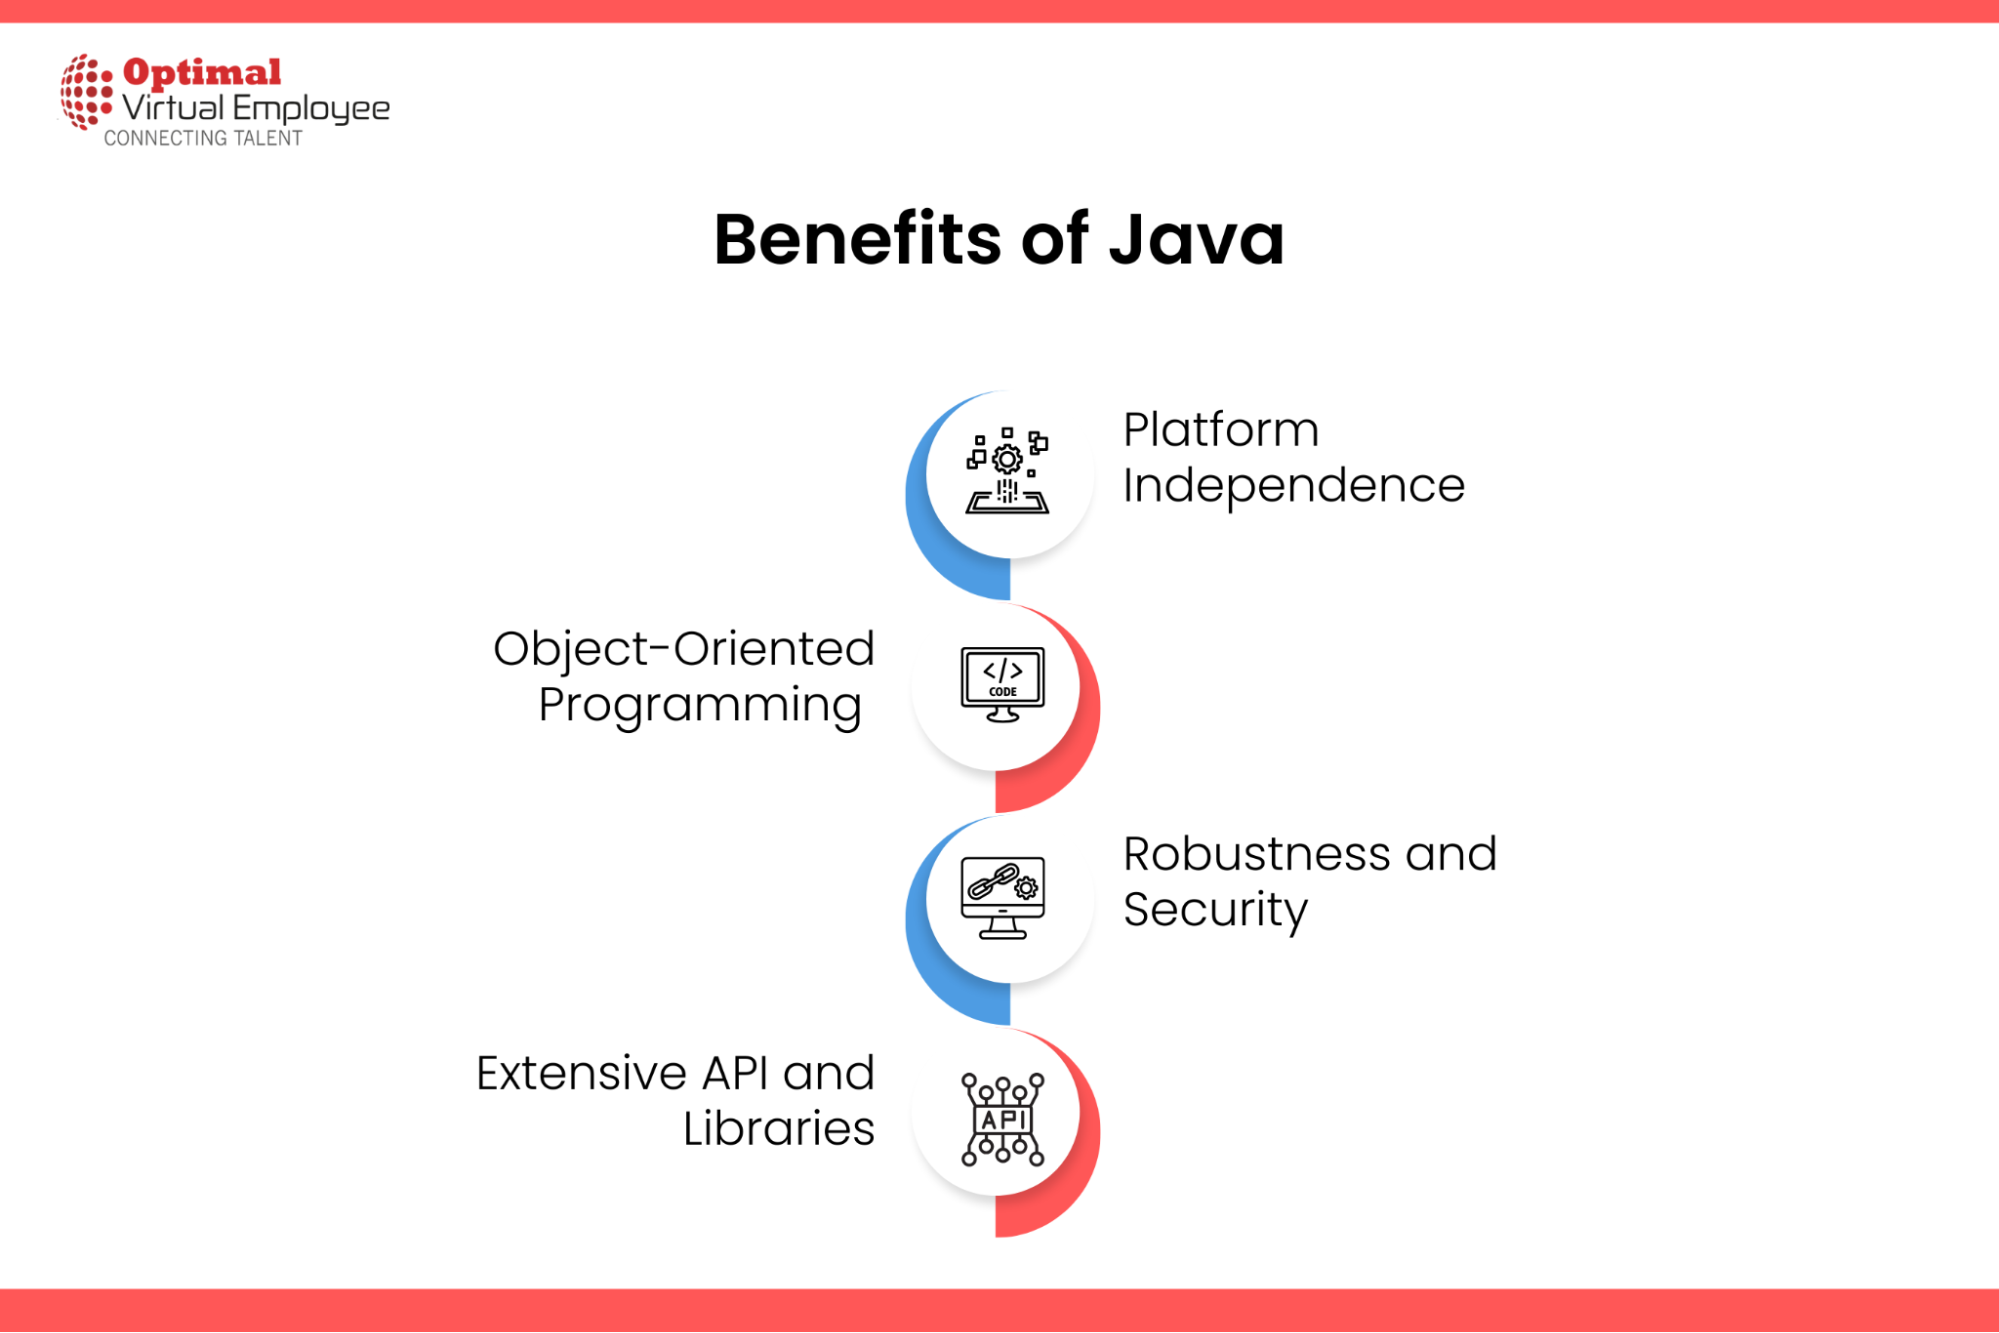 Key Features and Benefits of Java